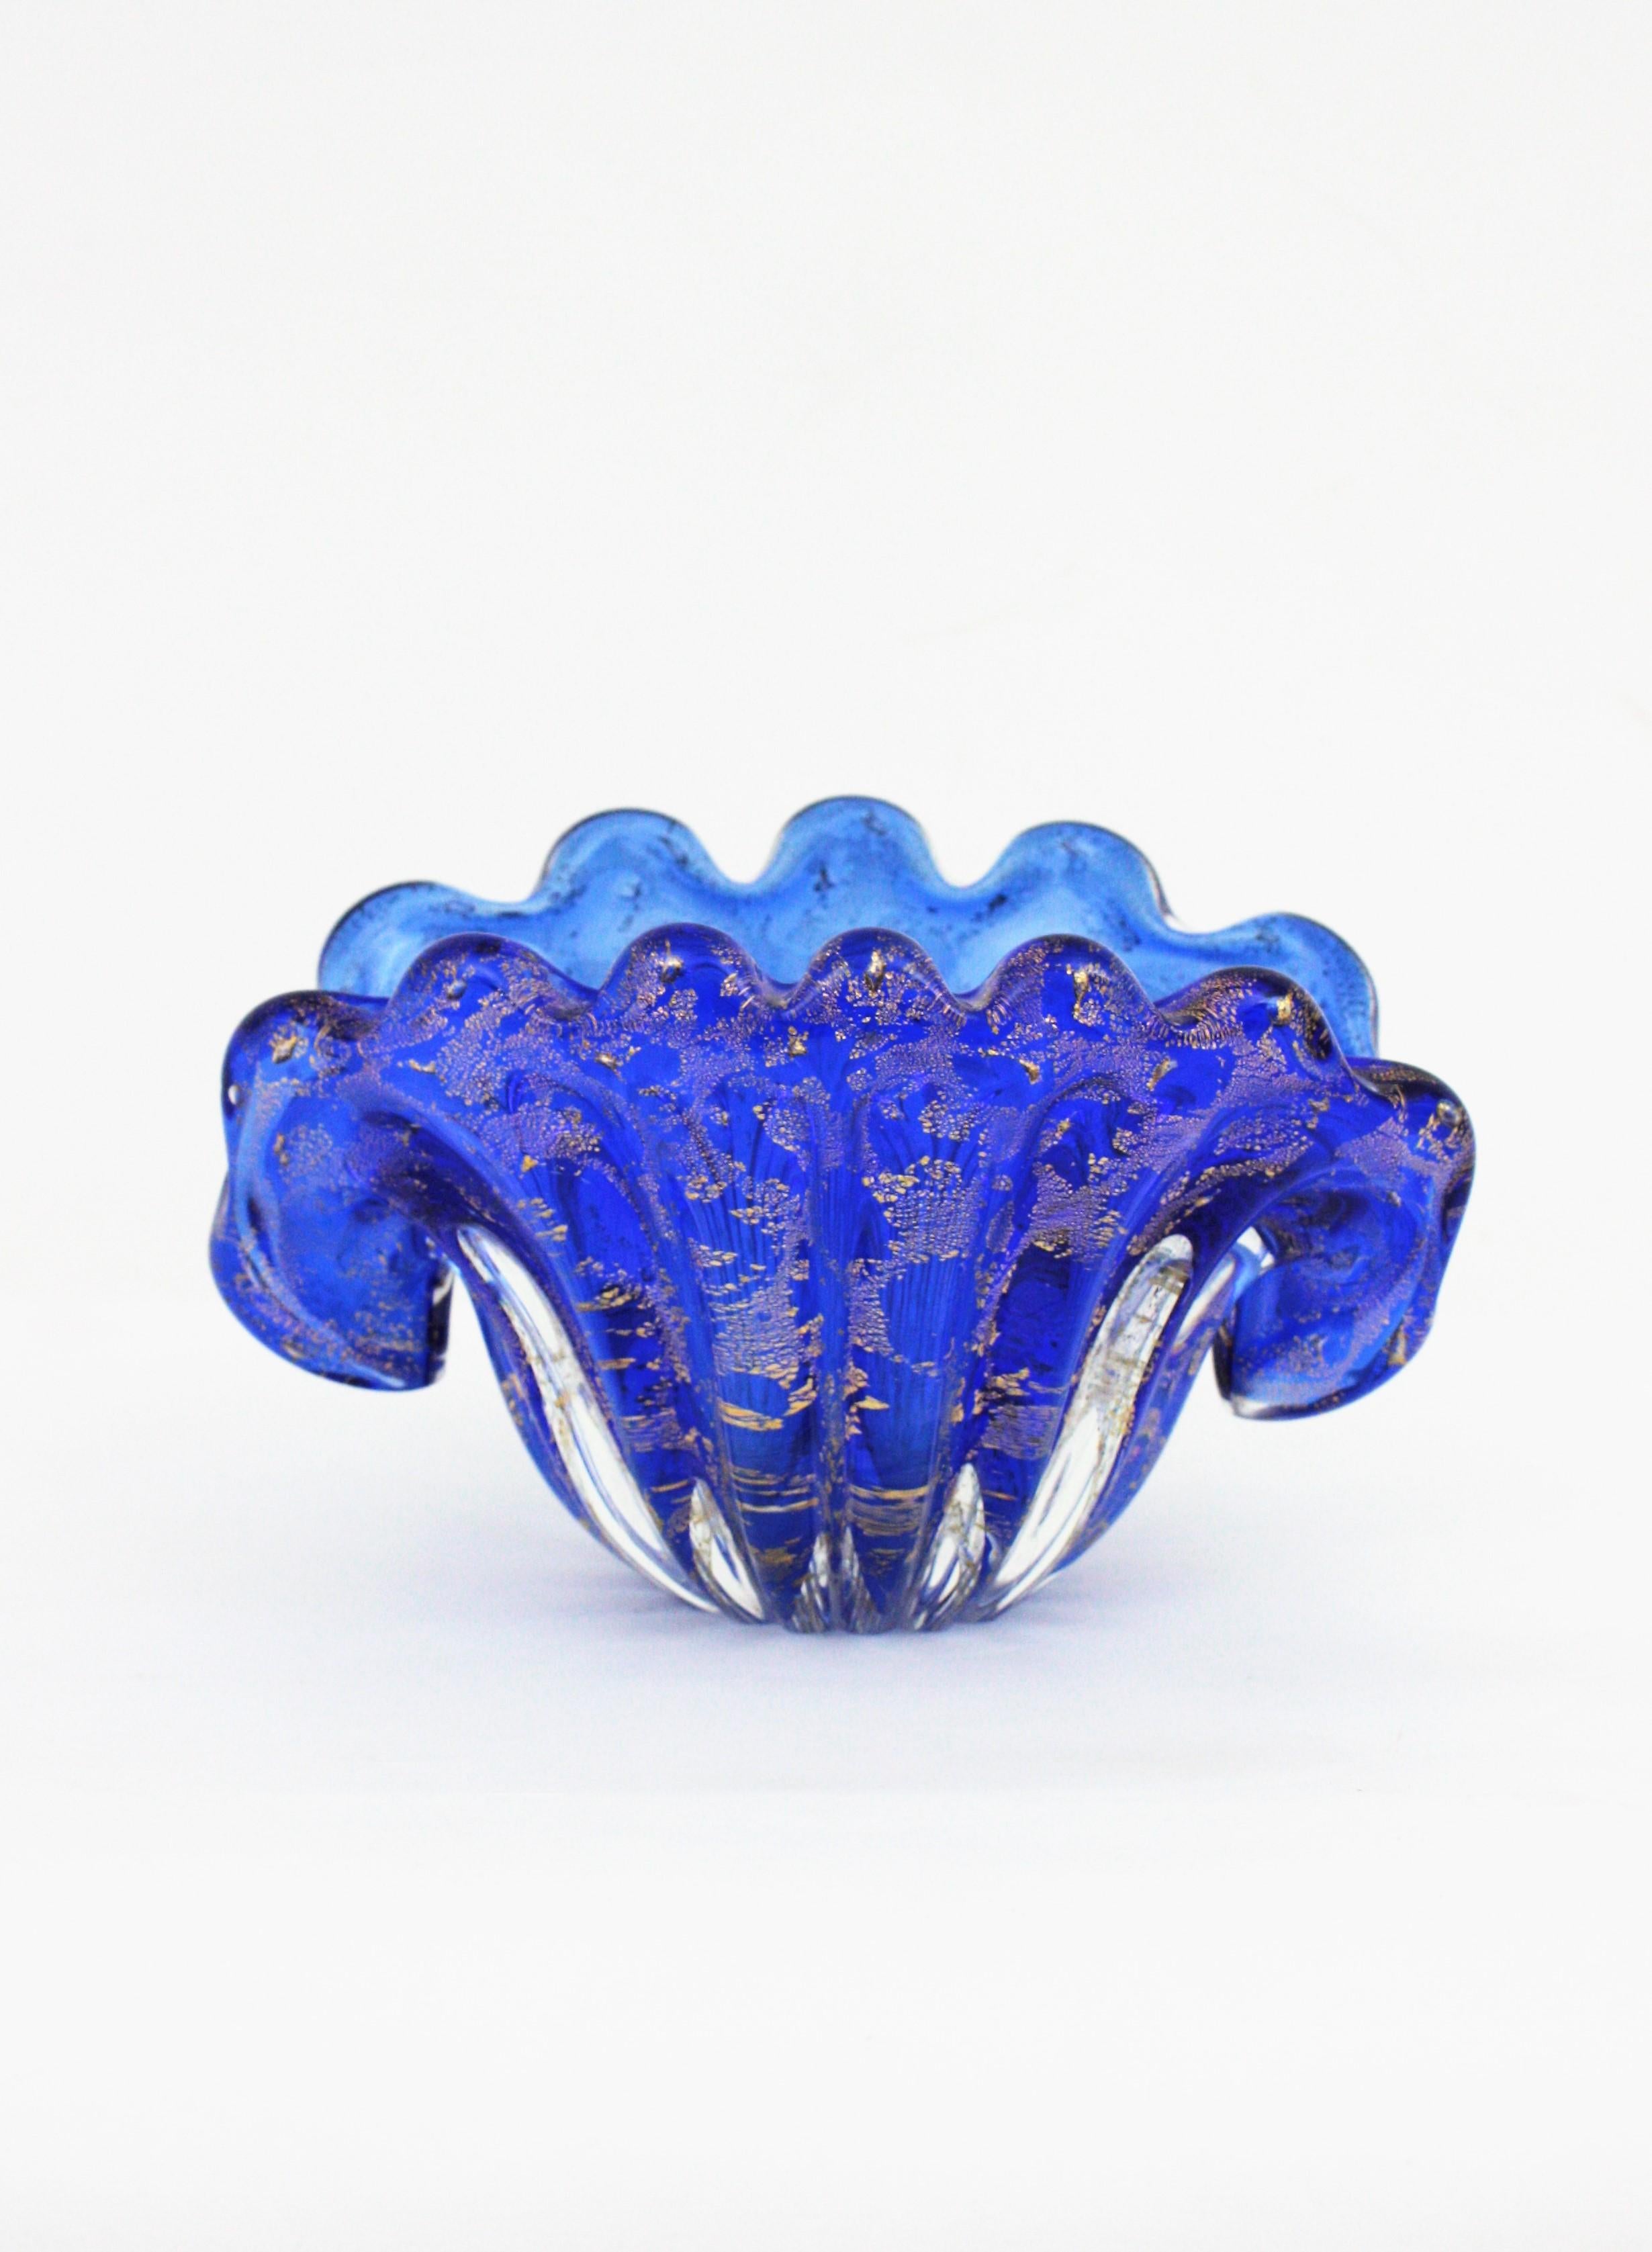 Archimede Seguso Murano Blue Gold Flecks Art Glass Large Clam Shell Bowl In Good Condition For Sale In Barcelona, ES